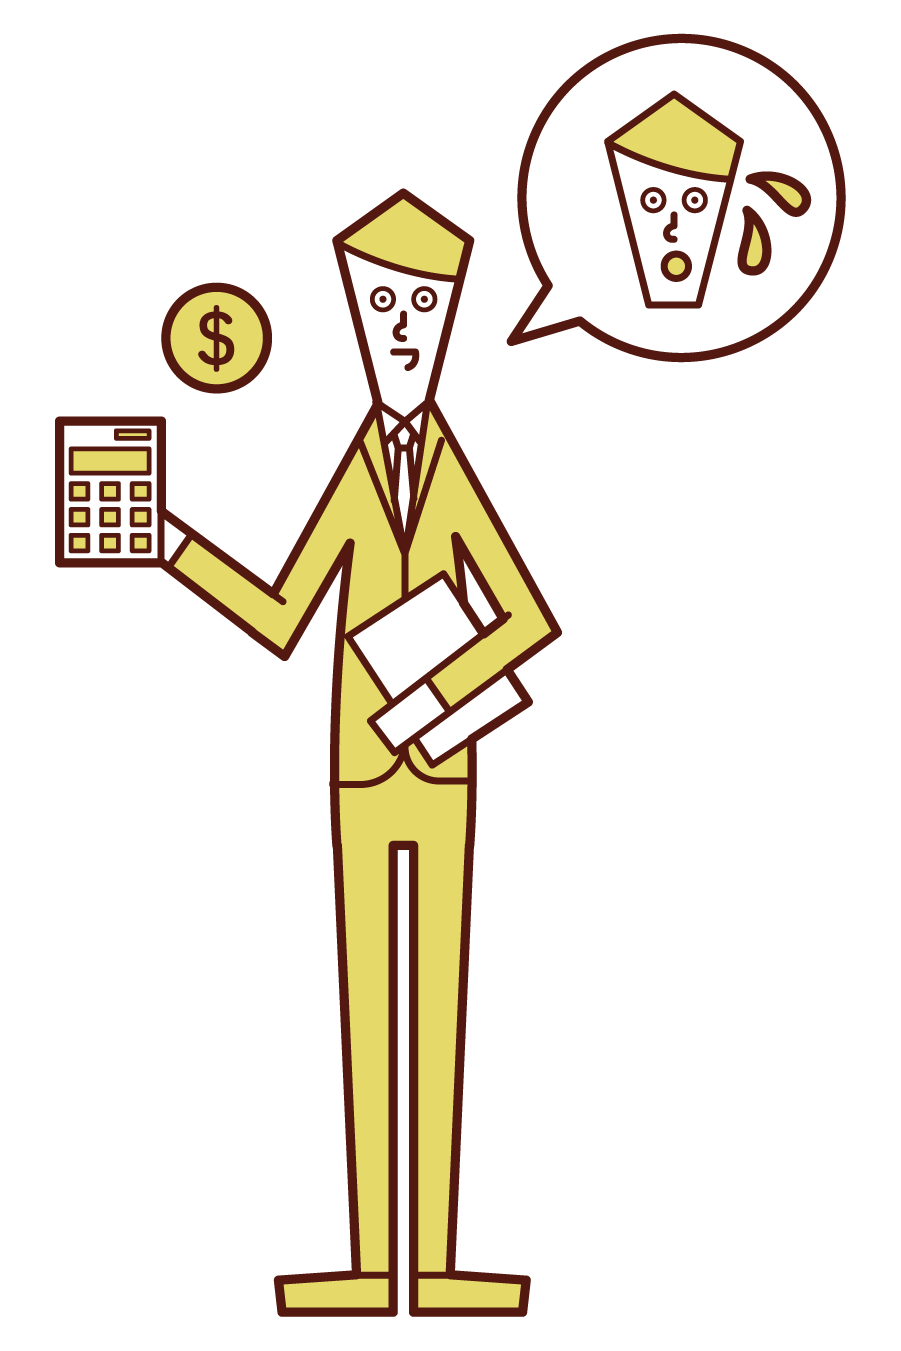 Illustration of a tax office employee (man)